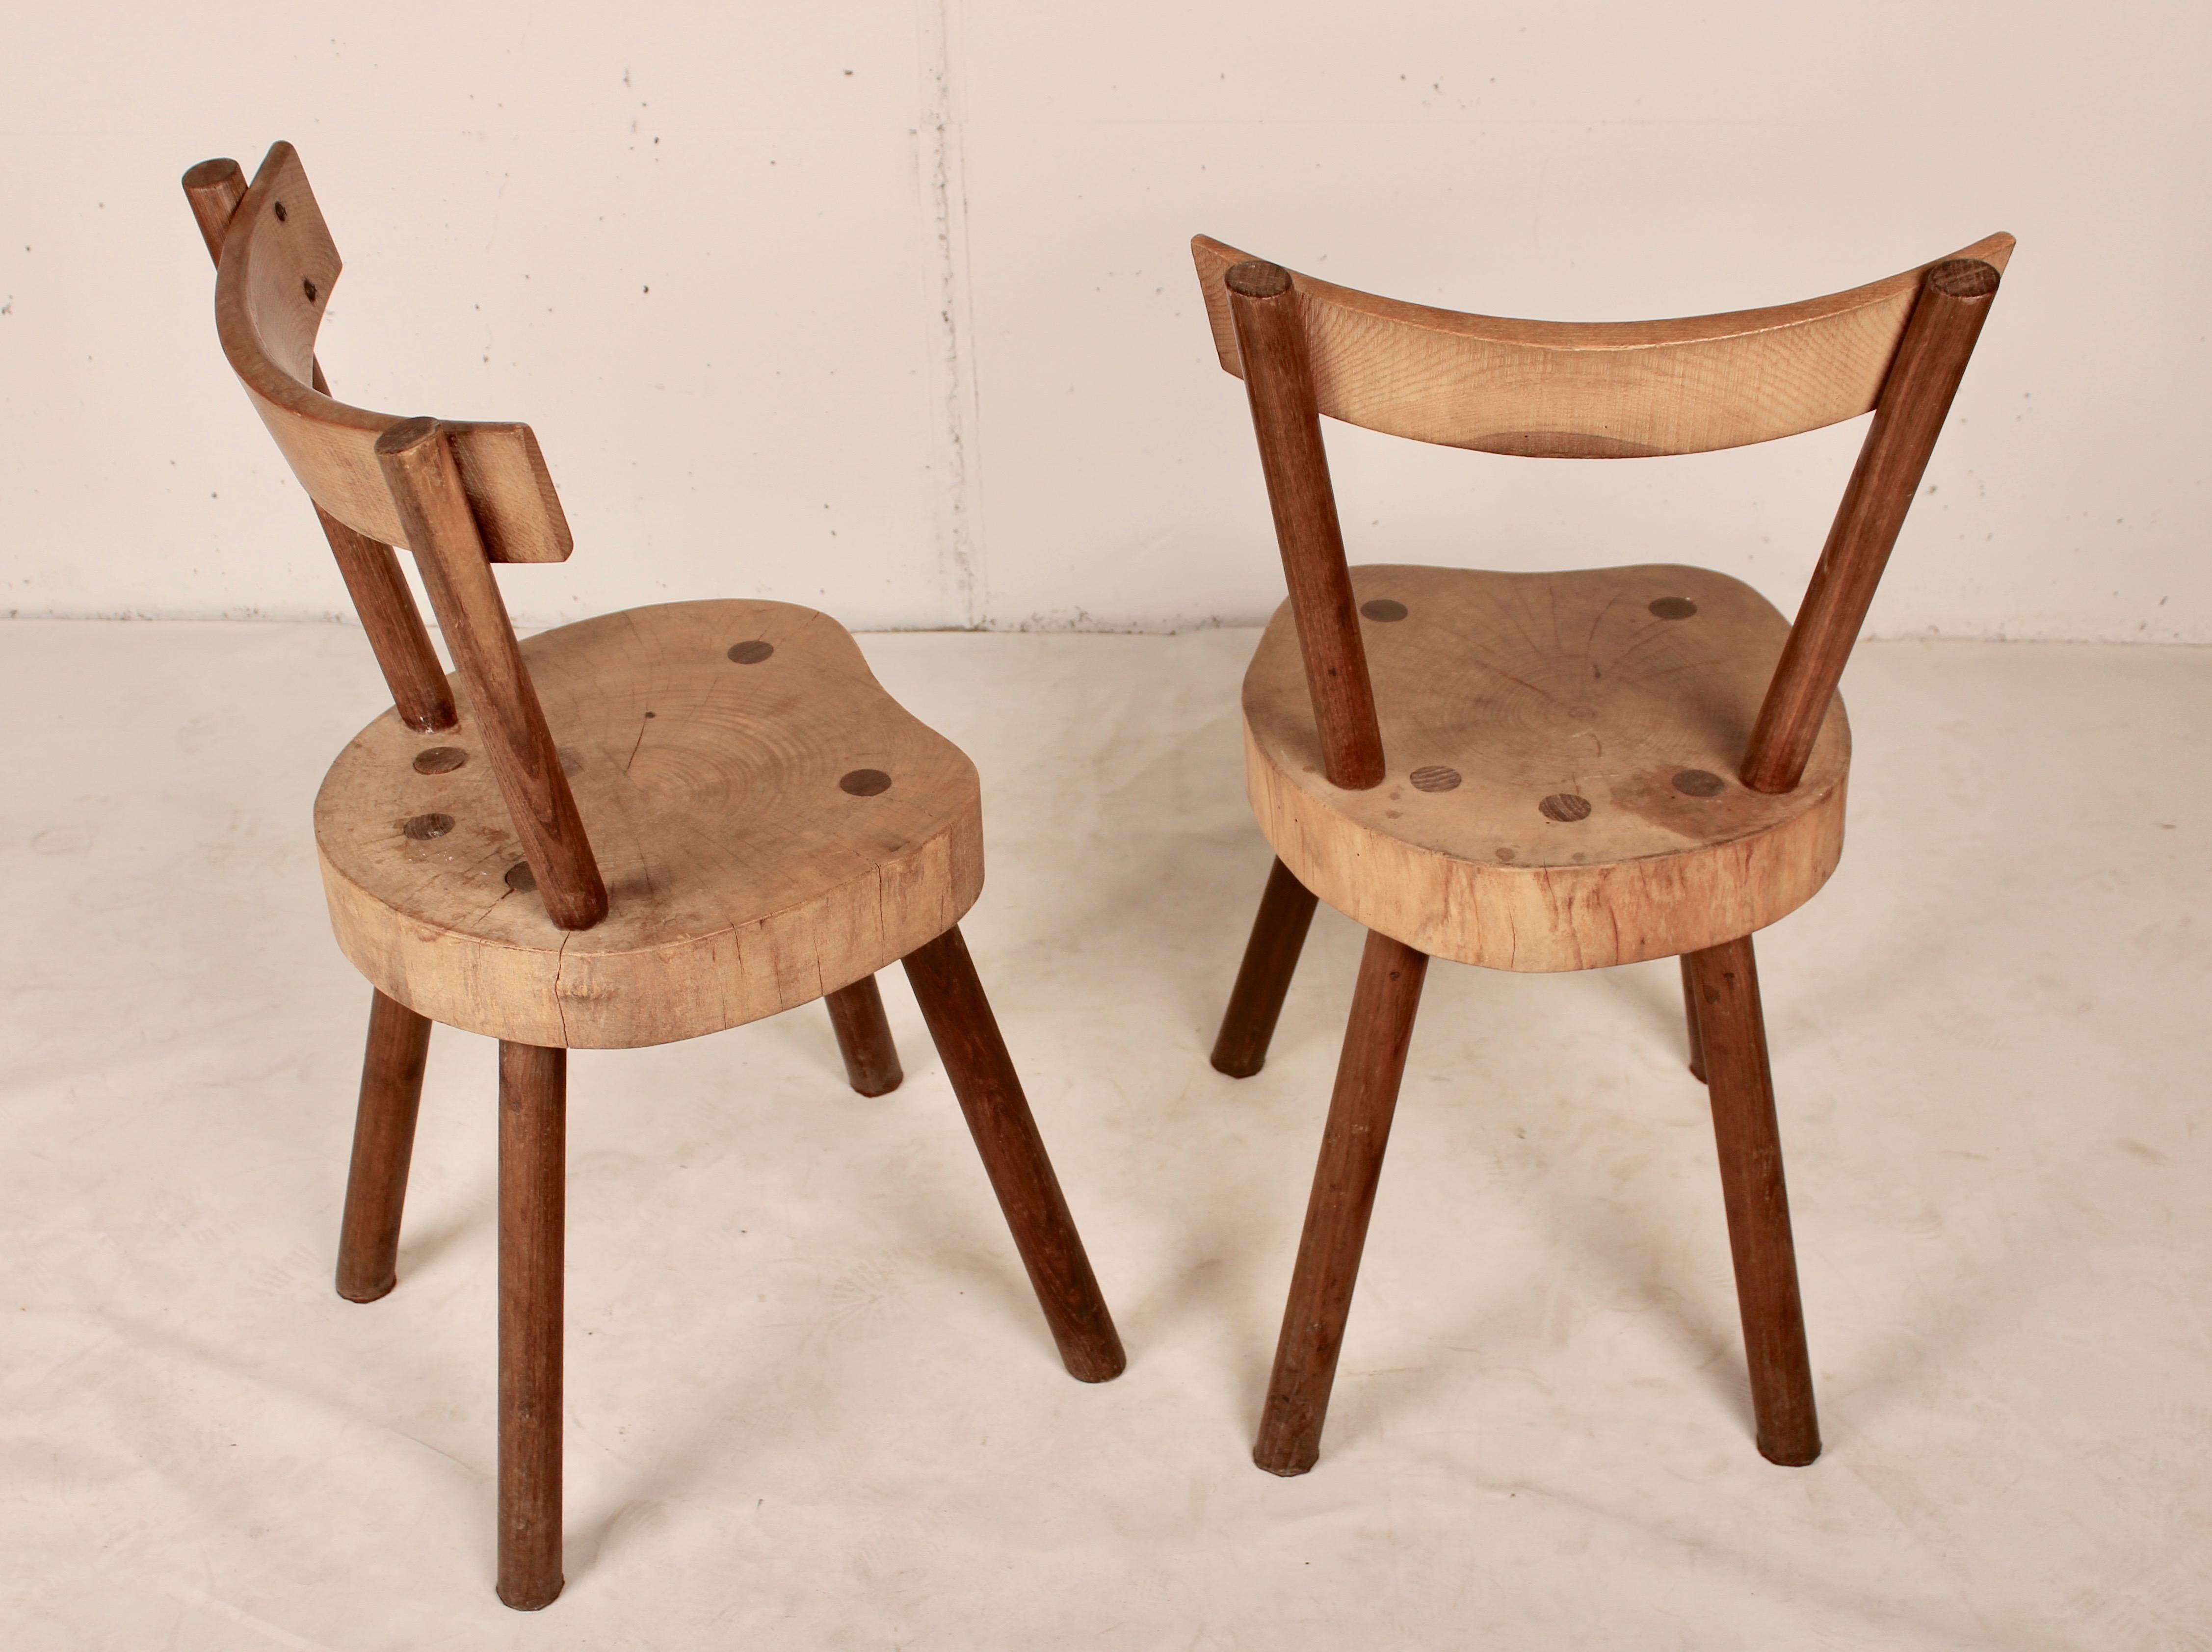 Chairs in massif wood made by anonymous carpenter from the French countryside Aveyron, 1960.